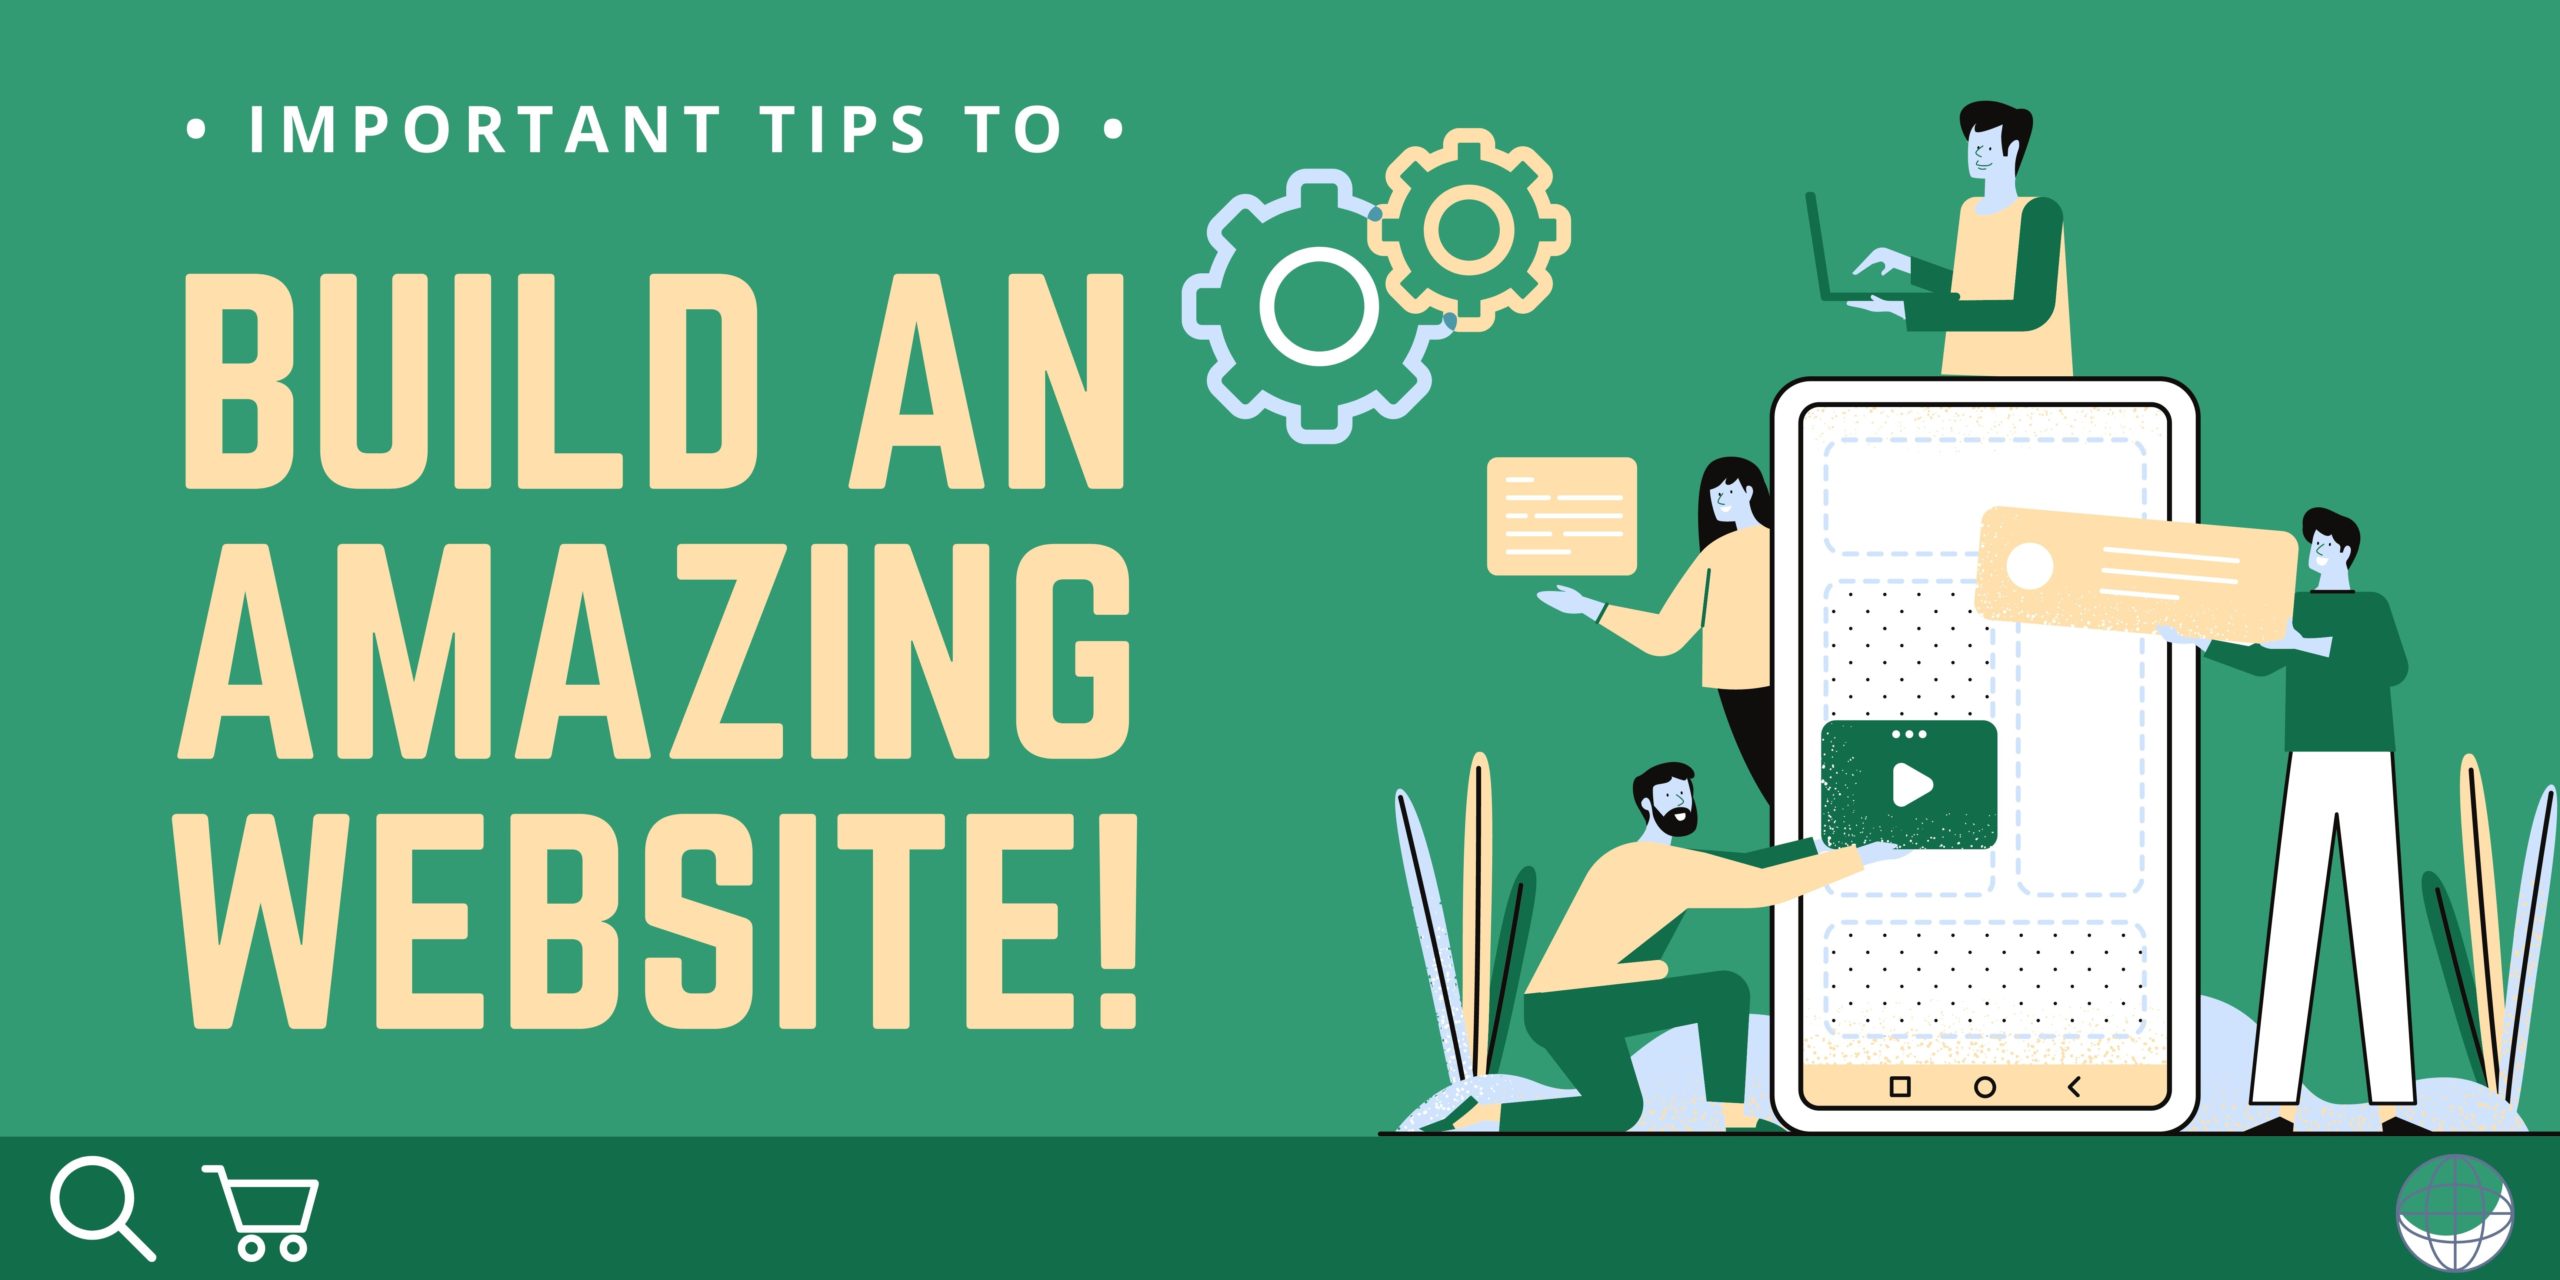 Important tips for building a good website